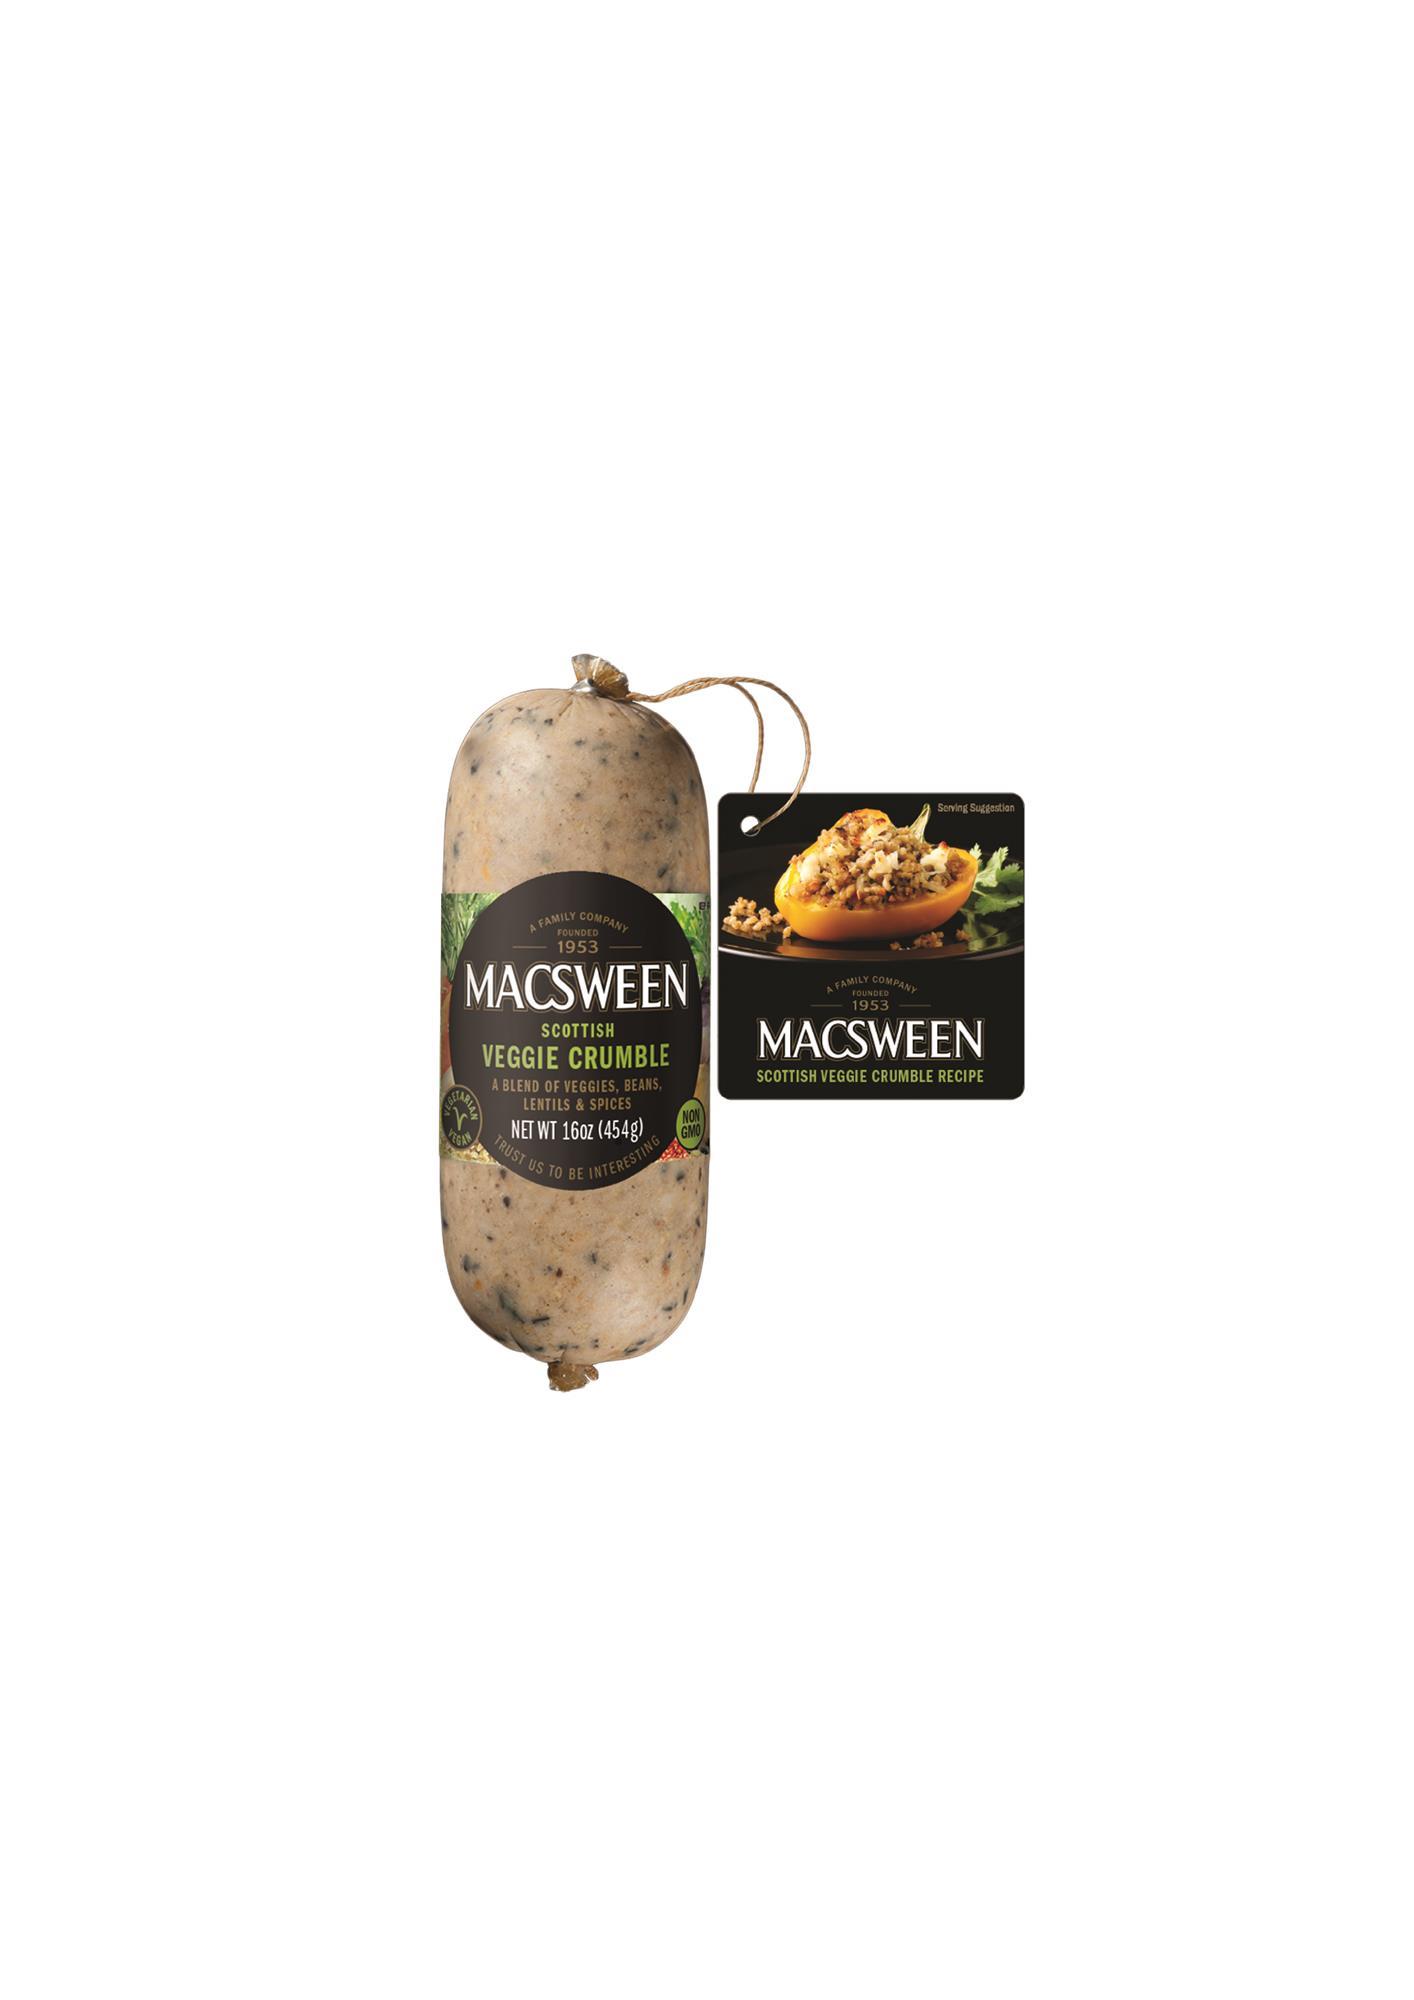 Macsween launches vegan haggis into the US News The Grocer